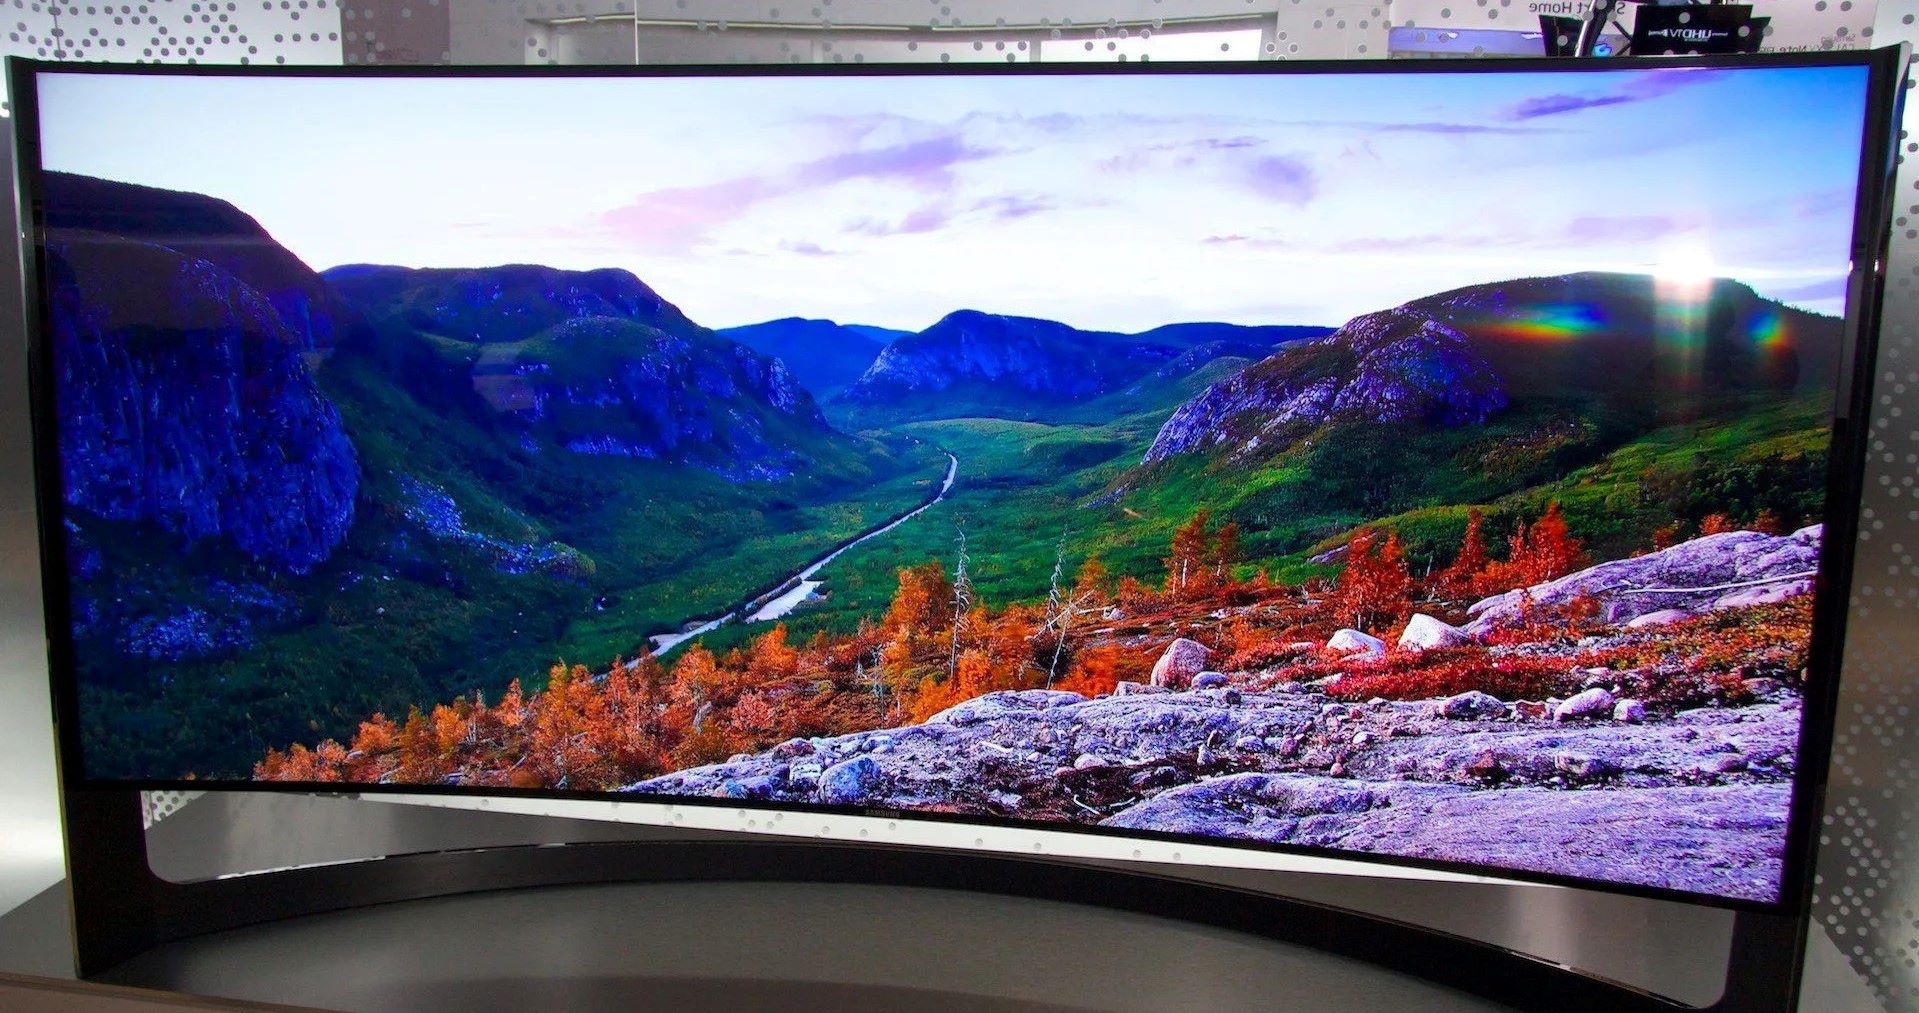 Curved-Screen TVs — What You Need To Know Before You Buy